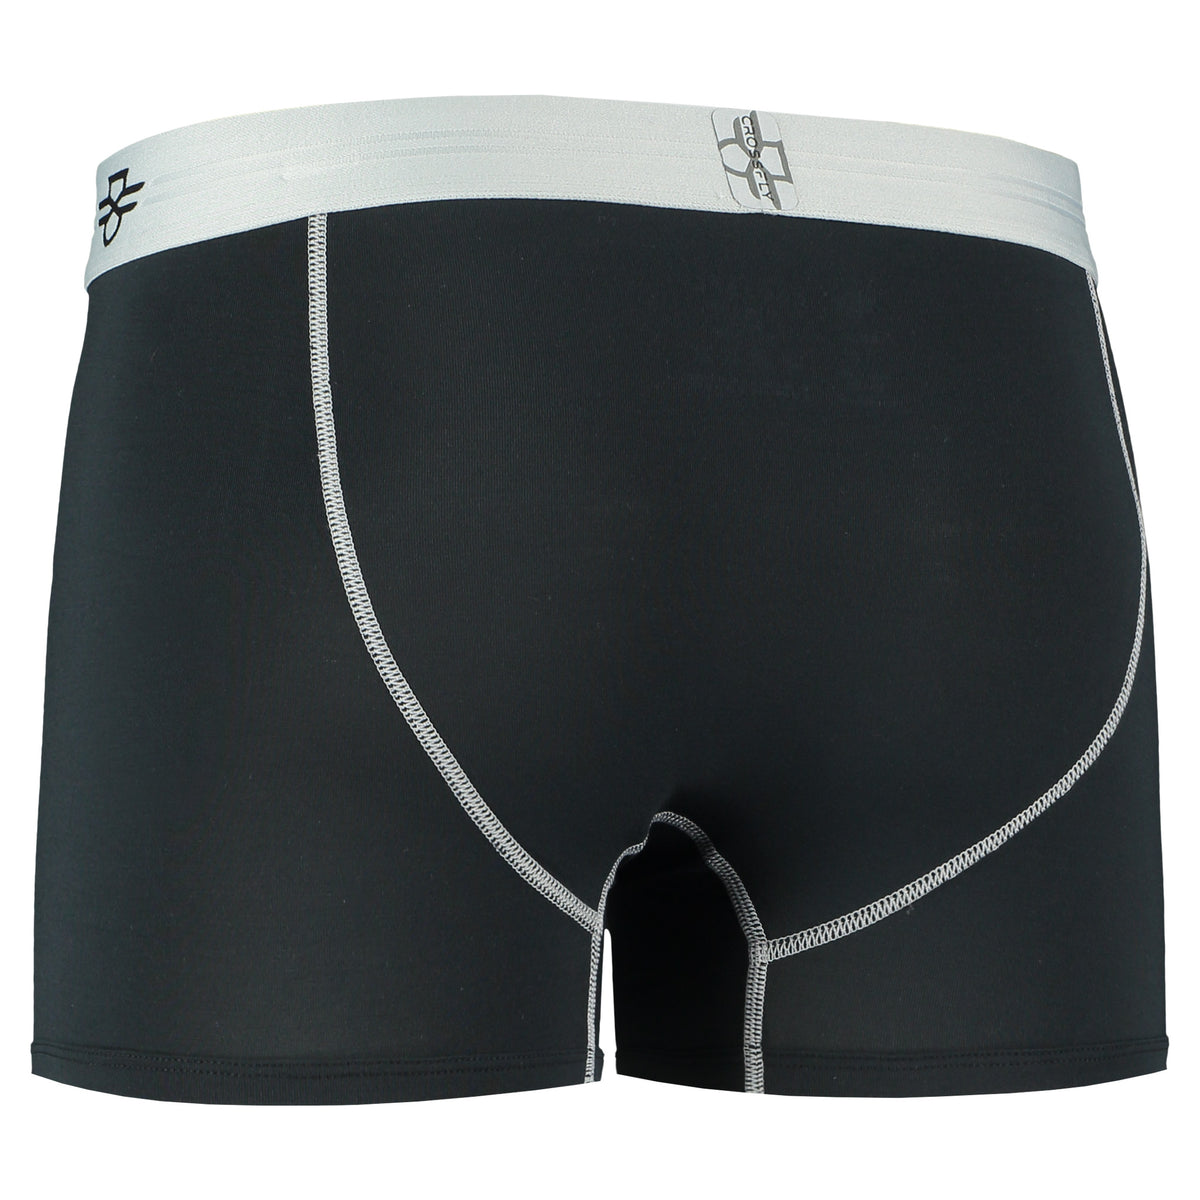 Crossfly men&#39;s IKON X 3&quot; black / silver trunks from the Everyday series, featuring X-Fly and Coccoon internal pocket support.